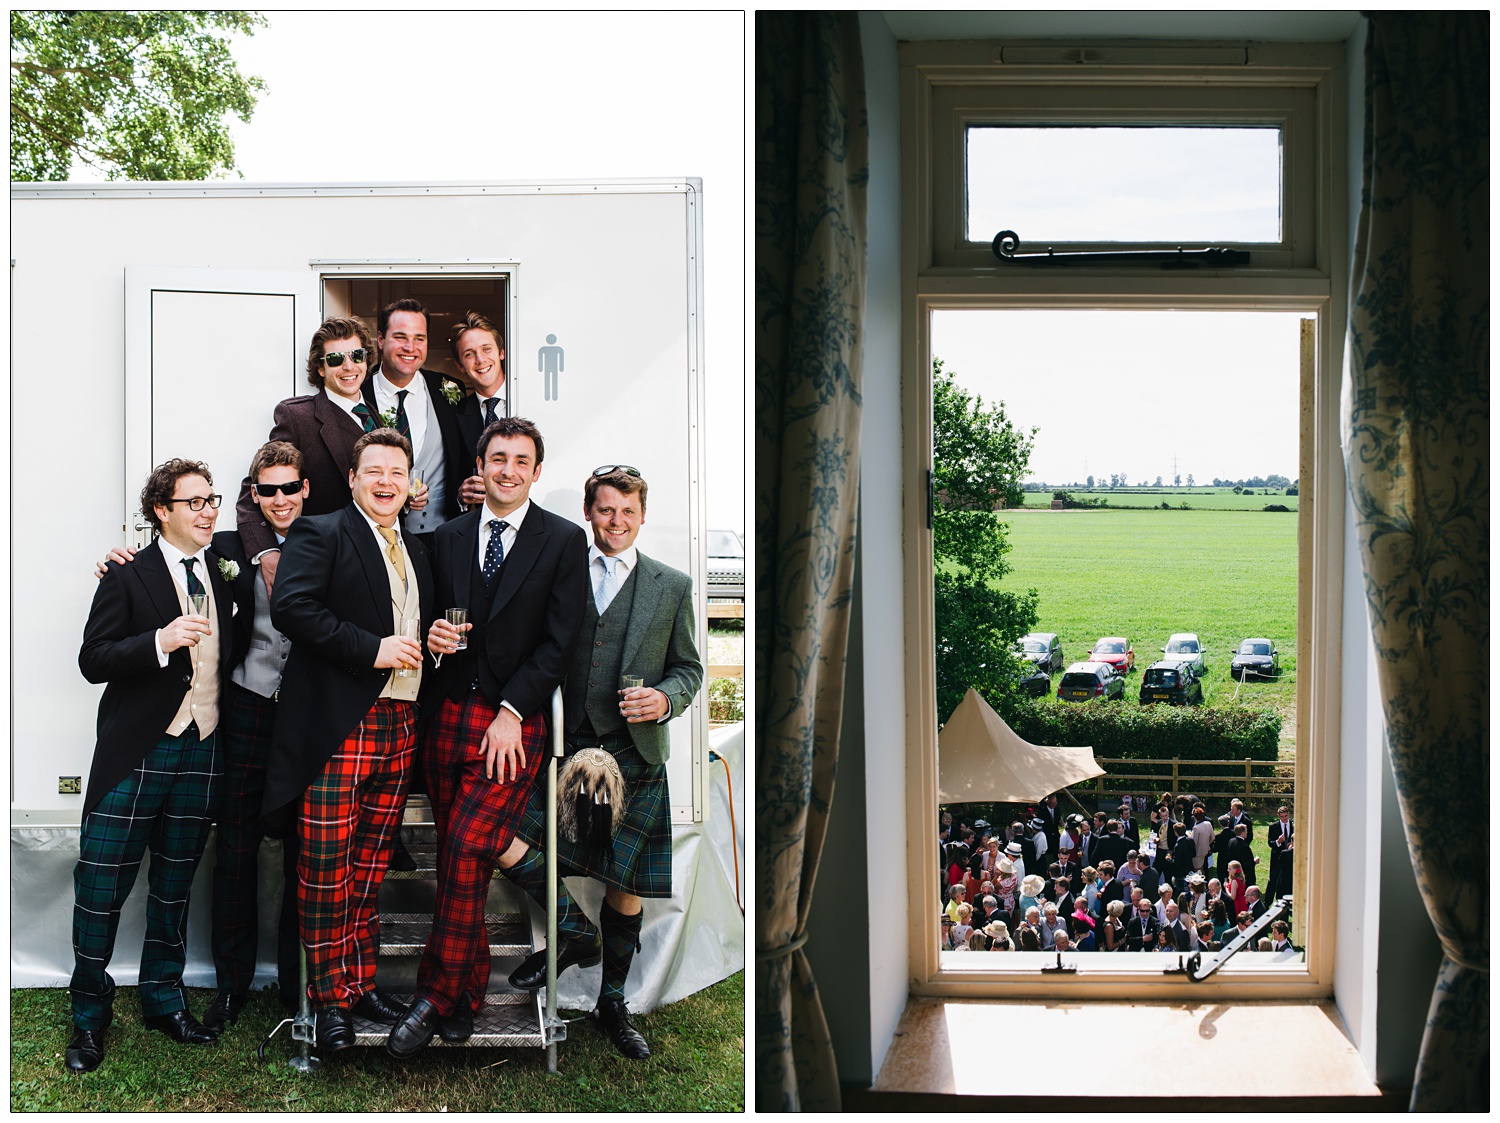 Some men at a wedding, many in tartan trousers, standing on the steps of a mobile toilet with the groom.